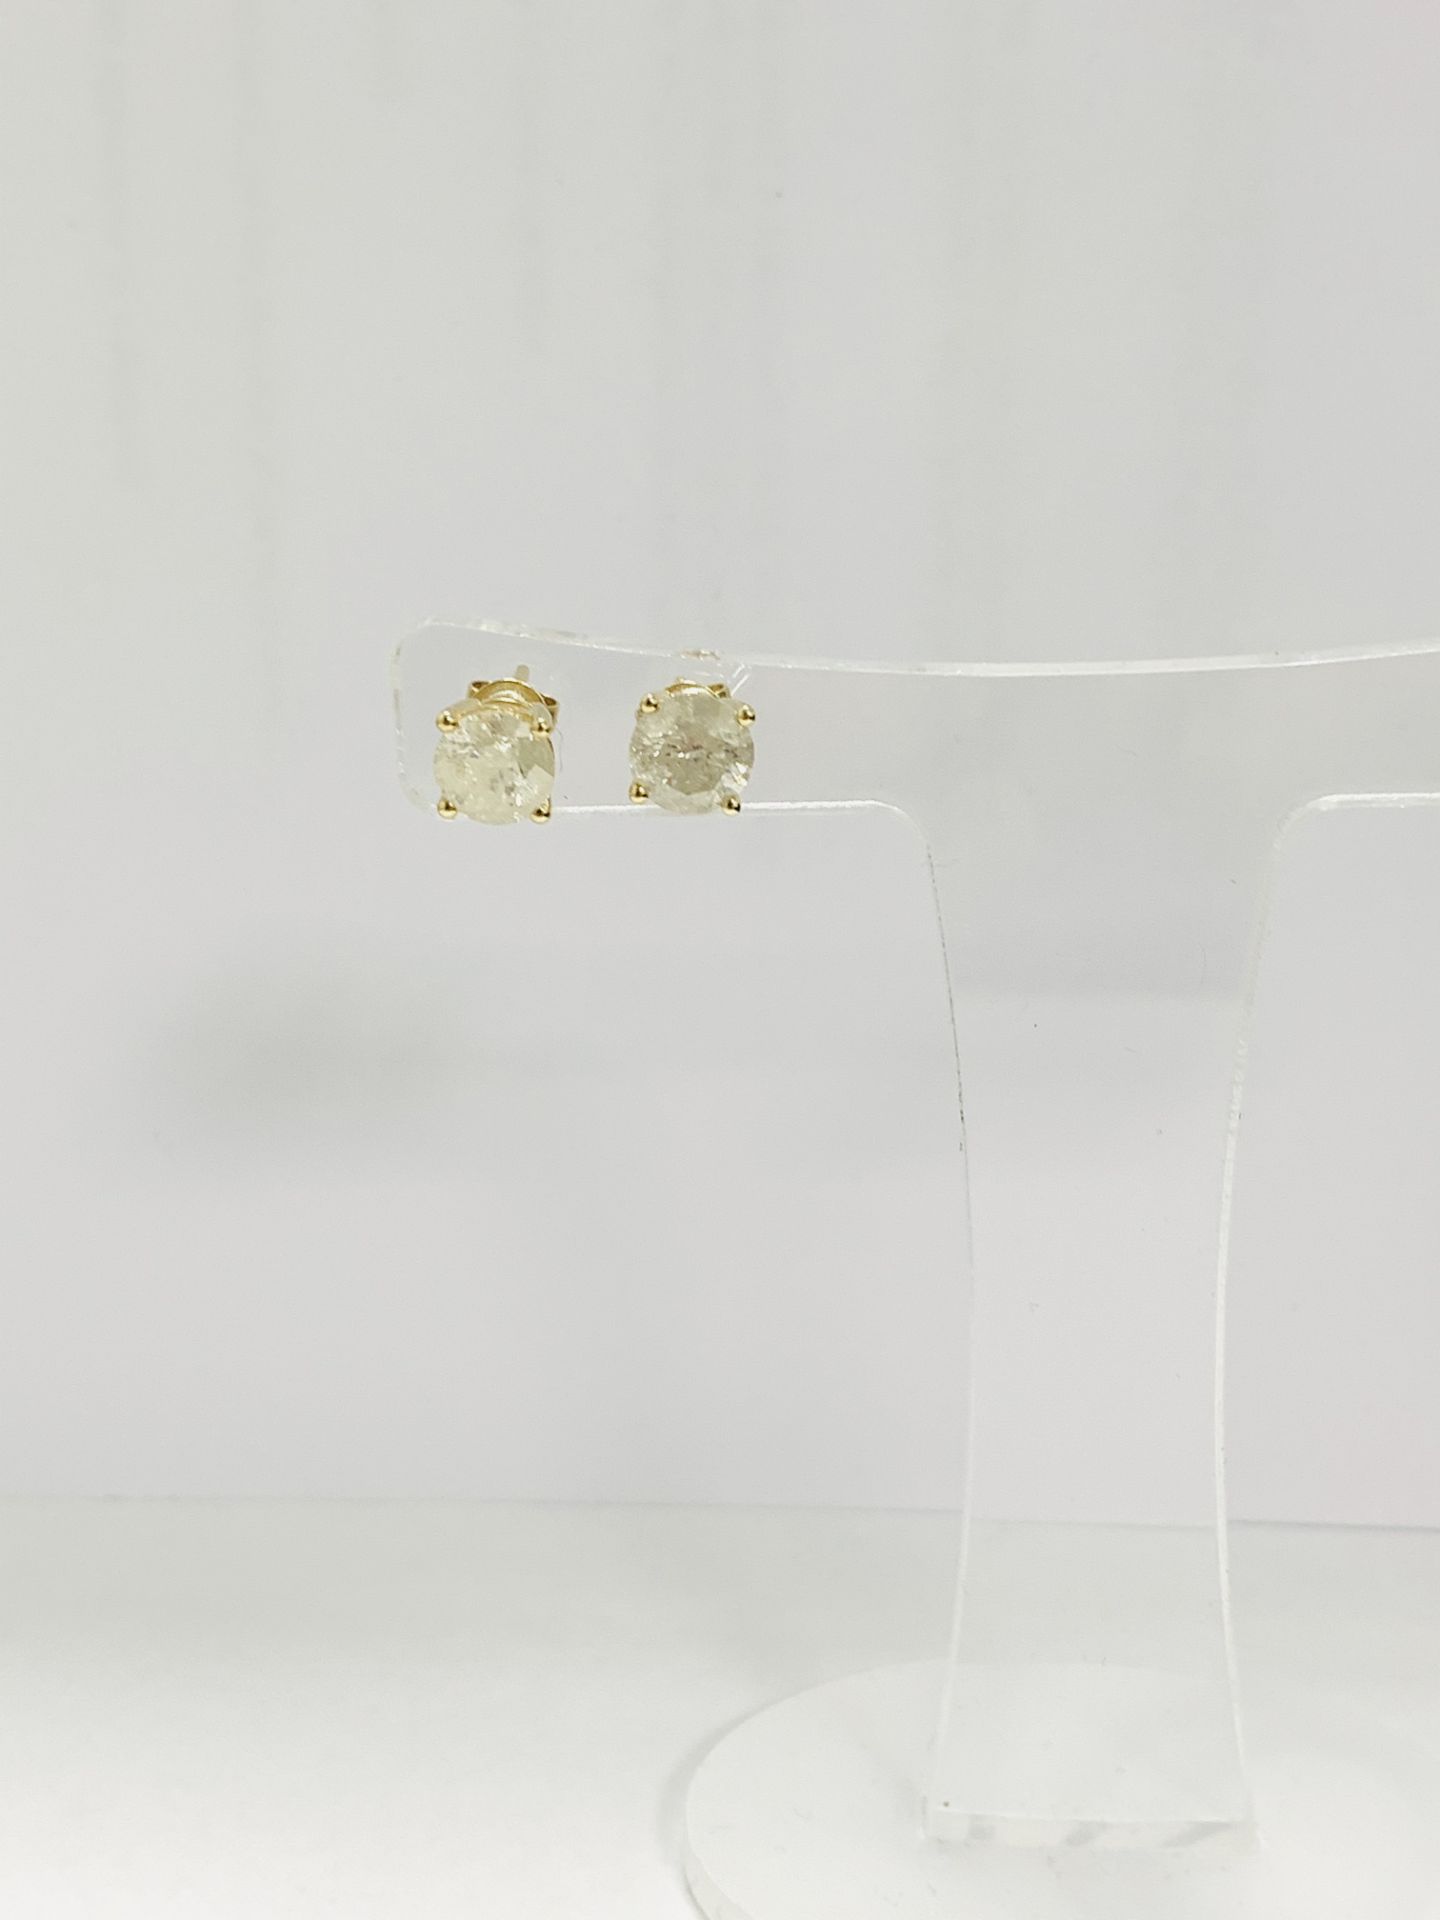 14Ct Yellow Gold Pair Of Earrings - Image 6 of 9